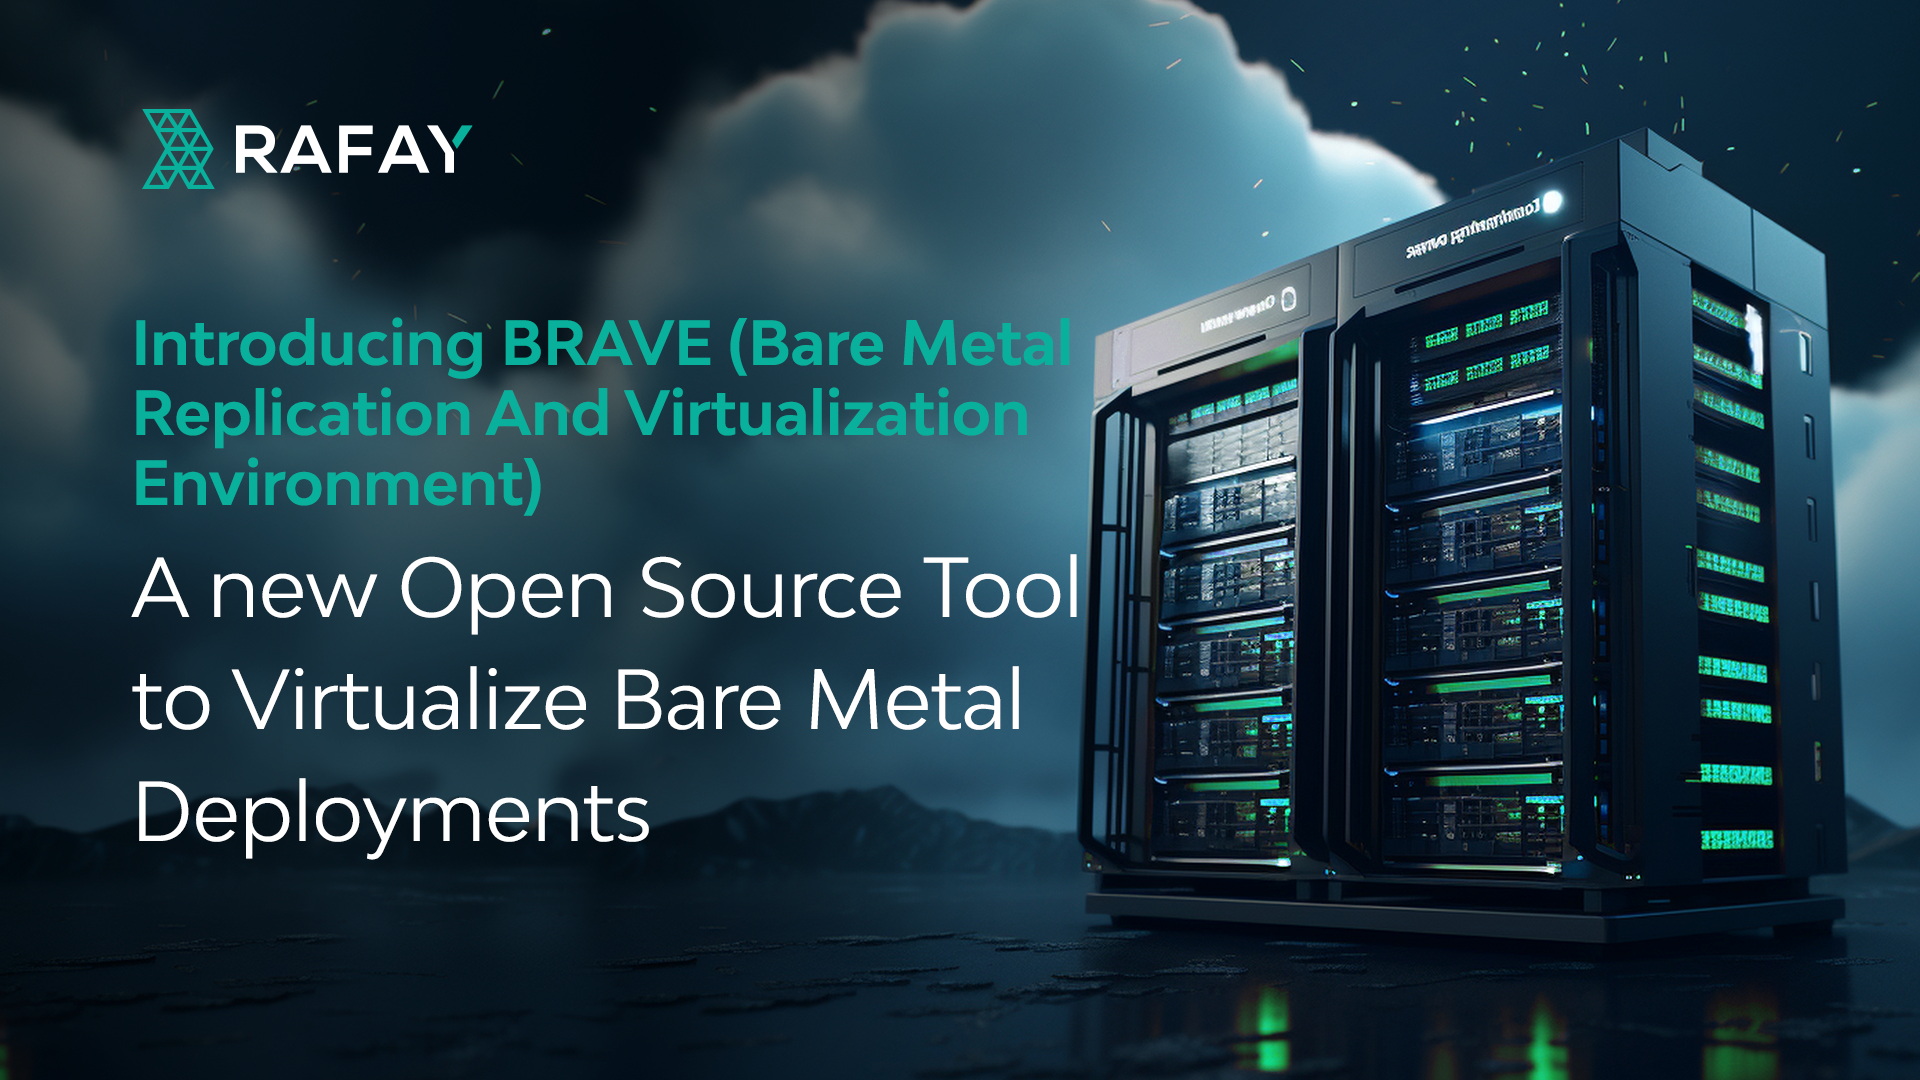 Image for Introducing BRAVE (Bare Metal Replication And Virtualization Environment): A new Open Source Tool to Virtualize Bare Metal Deployments